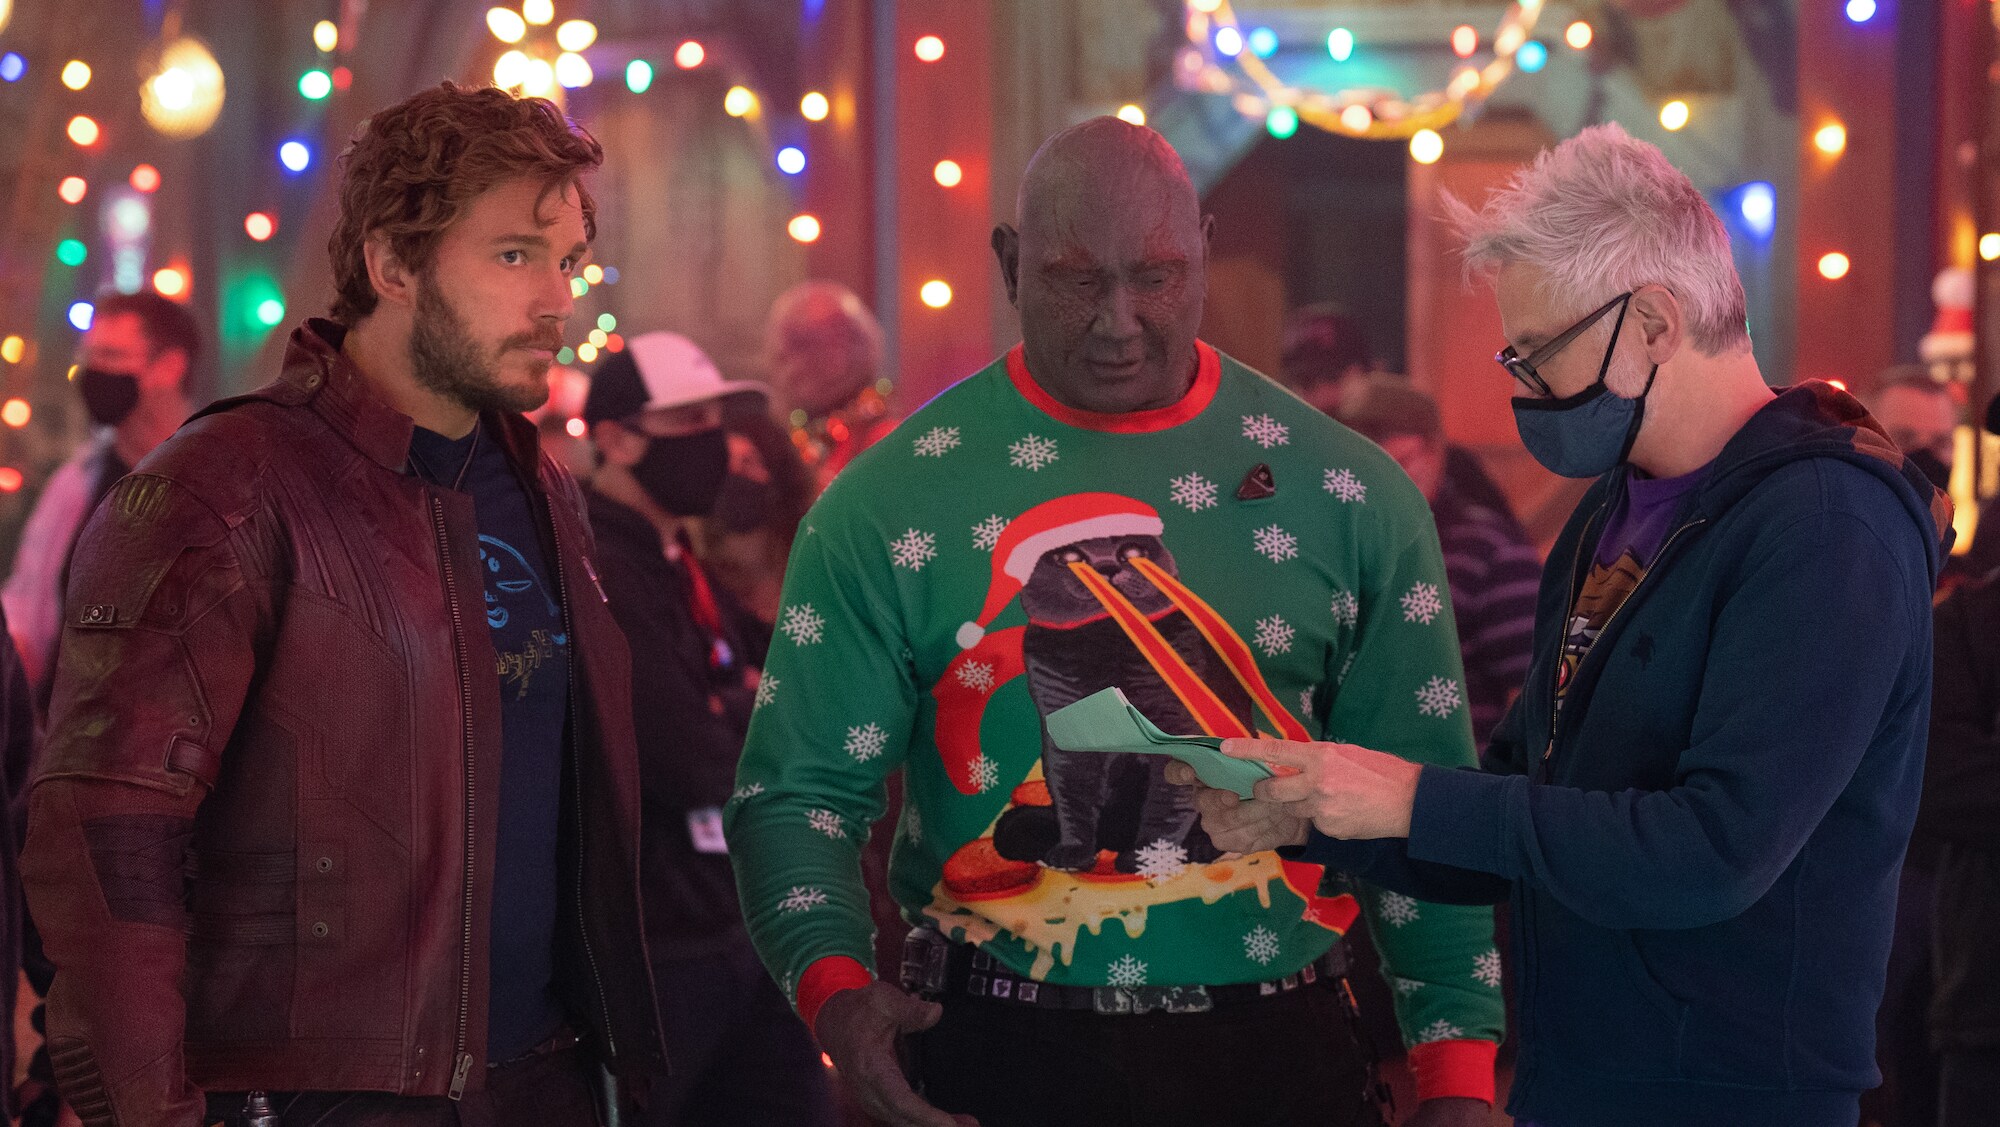 (L-R): Chris Pratt as Peter Quill/Star-Lord, Dave Bautista as Drax, and Director/Writer James Gunn behind the scenes of Marvel Studios' THE GUARDIANS OF THE GALAXY: HOLIDAY SPECIAL. Photo by Jessica Miglio. © 2022 MARVEL.